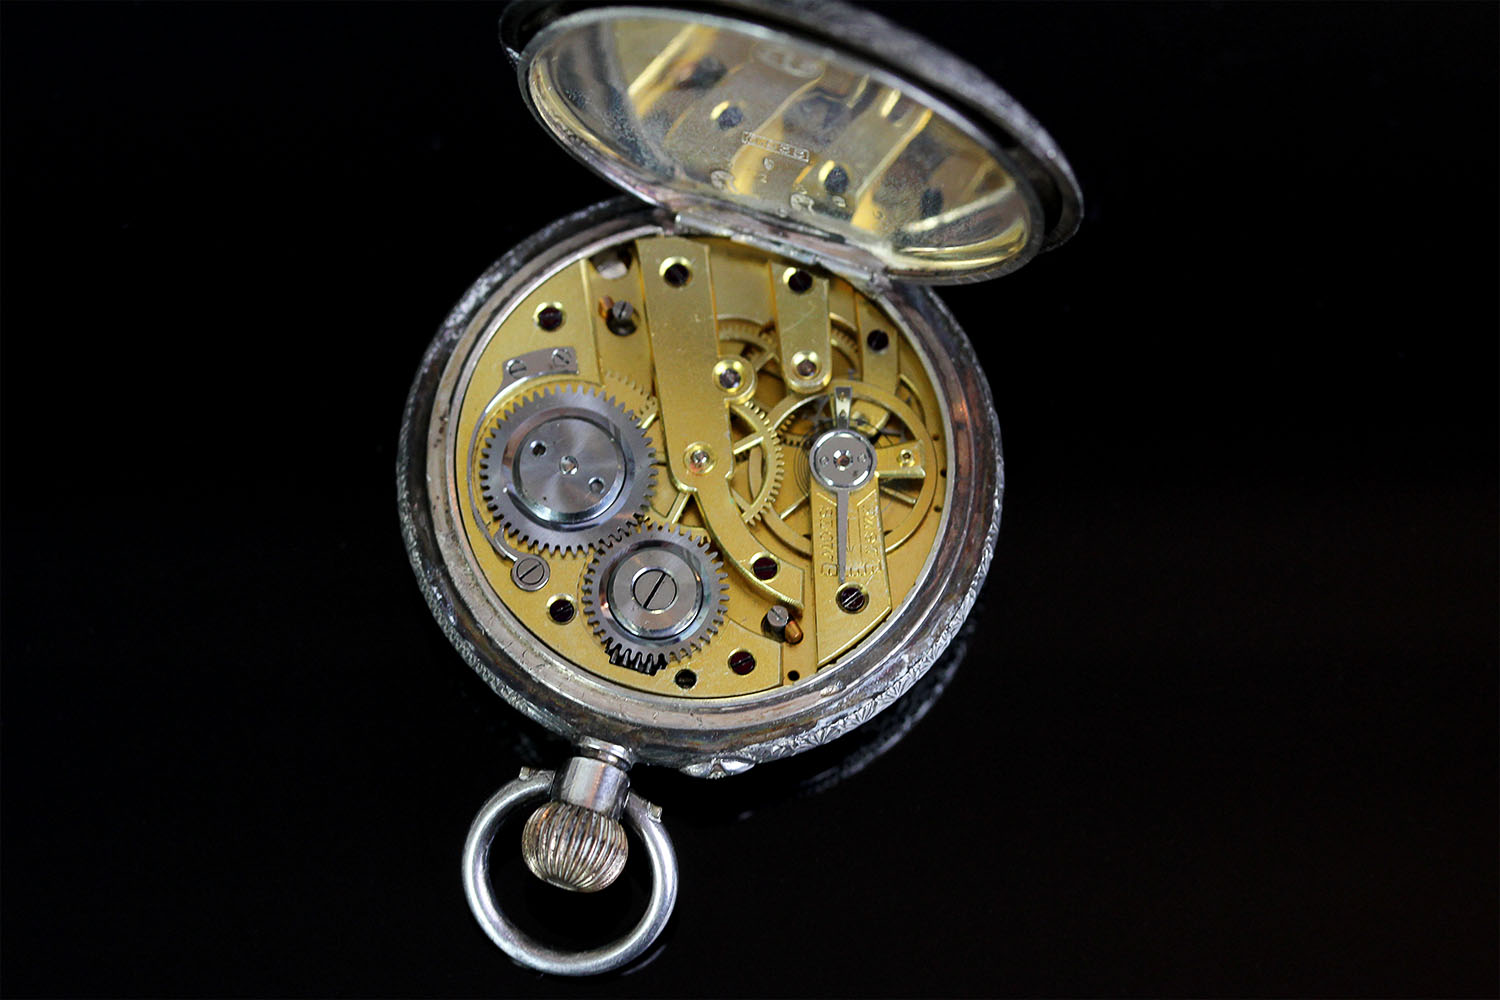 SILVER OPEN POCKET WATCH MADE BY L. MYERS AND CO, SWISS MADE,round, white dial with gold hands, blue - Image 3 of 3